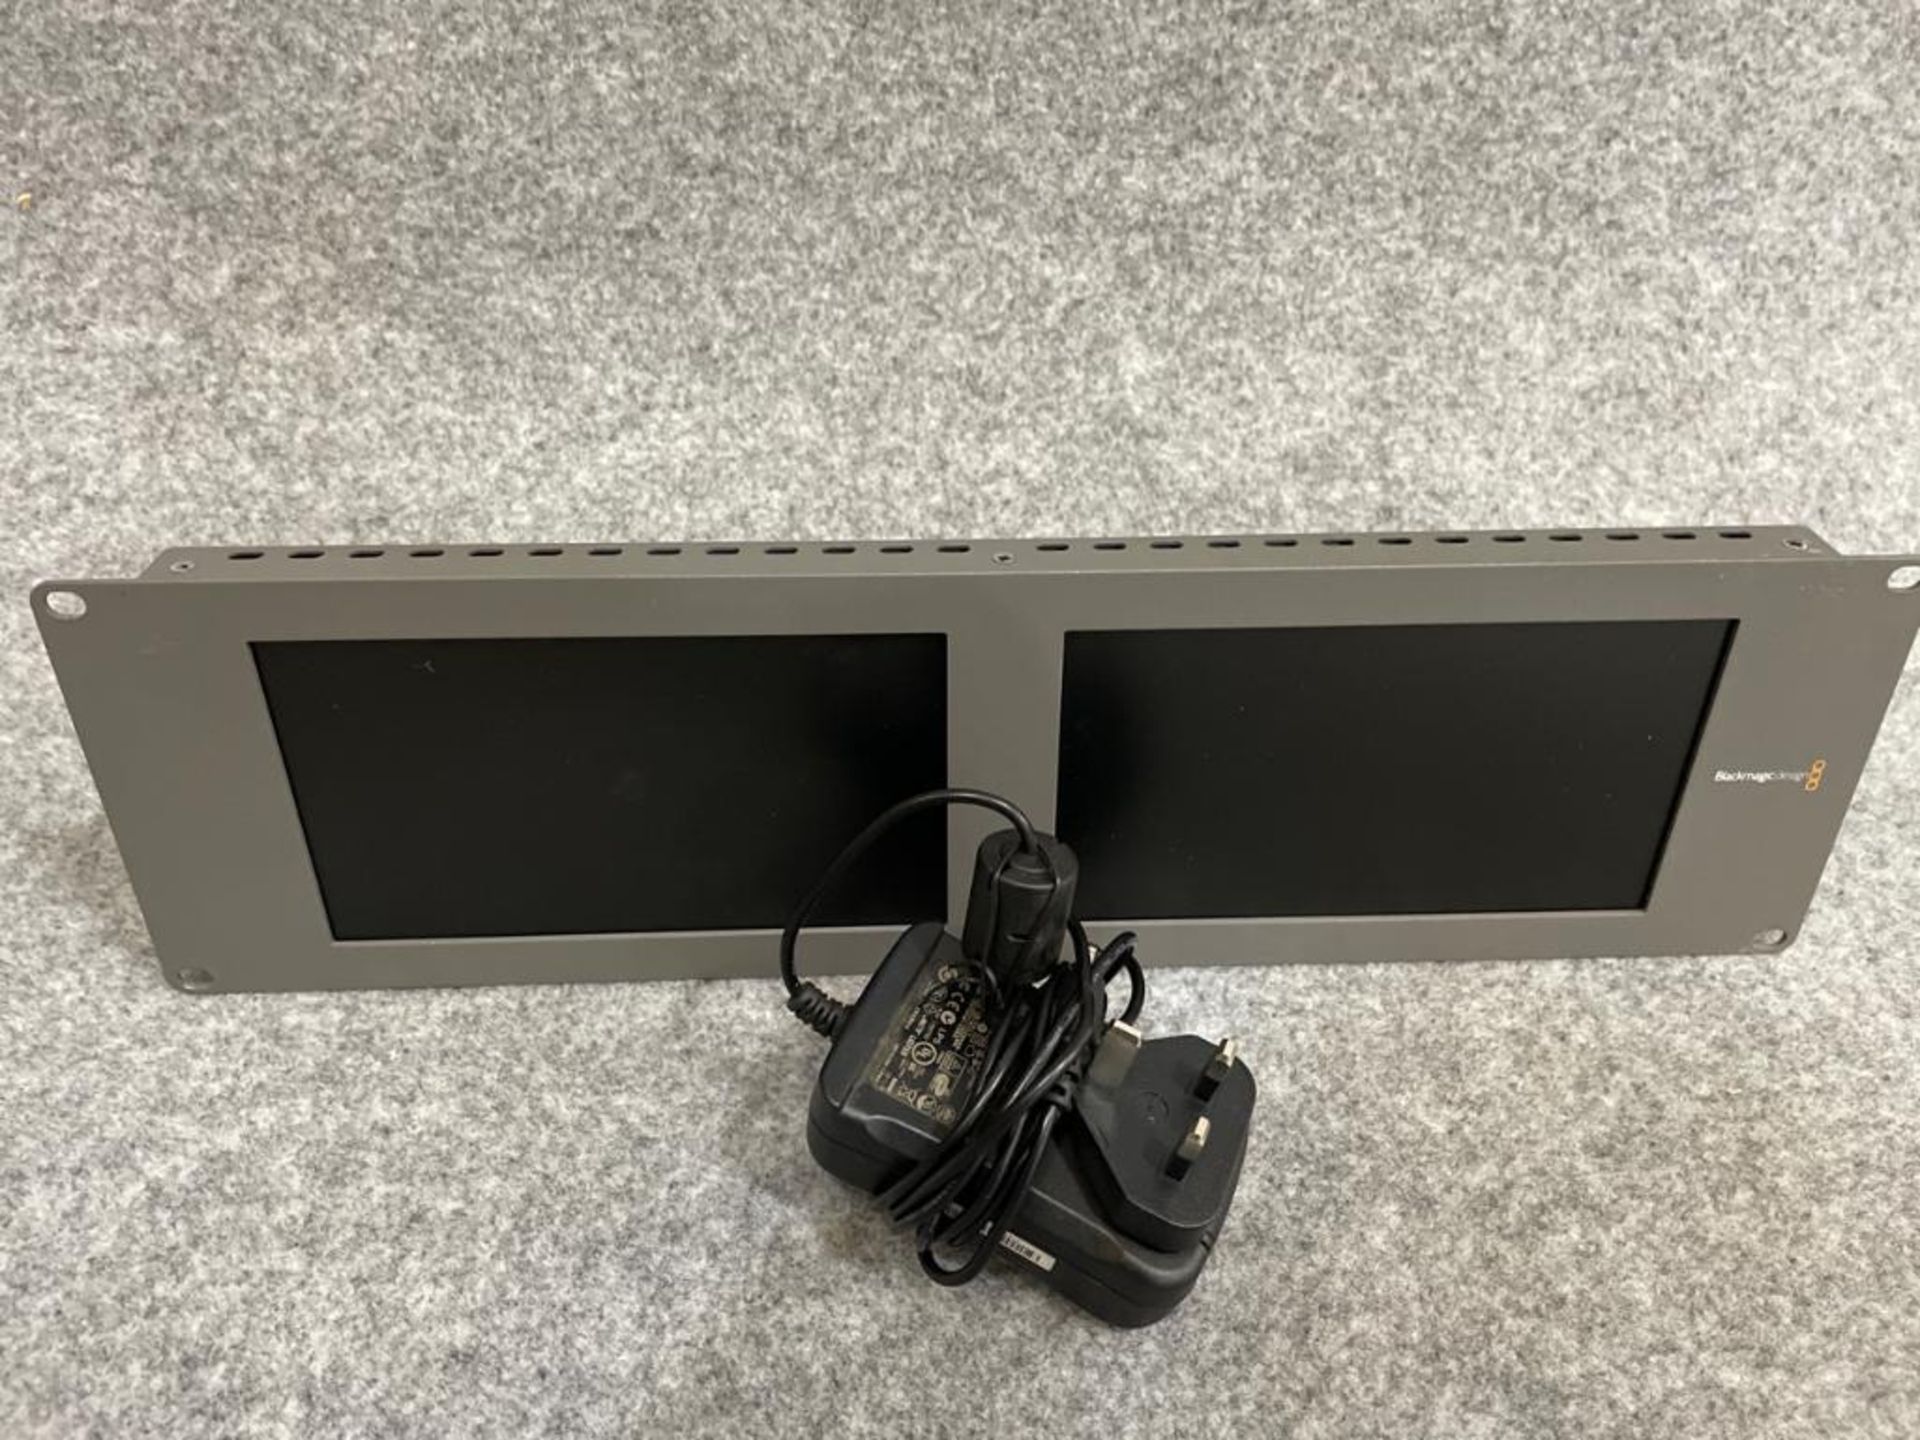 BlackMagic Dual HD Monitor with power supply SN: 1391437 - Image 3 of 3